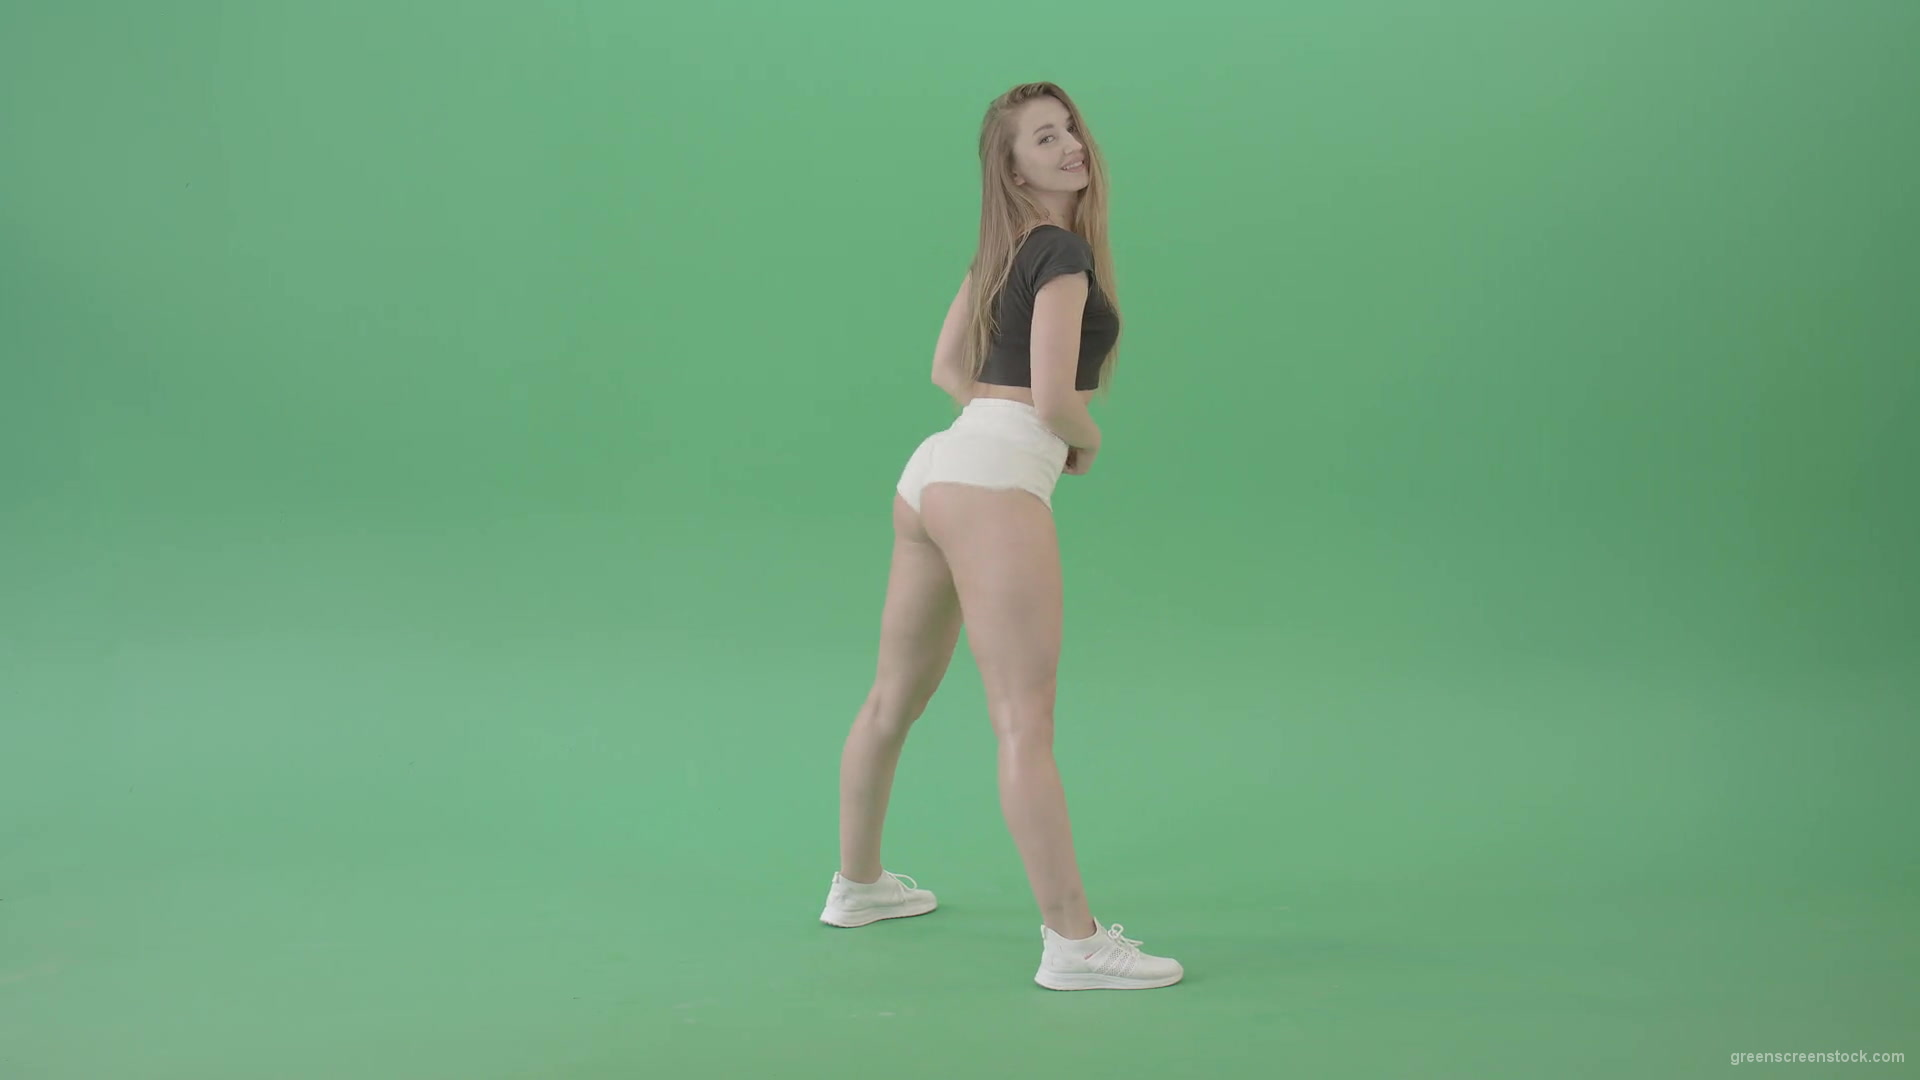 Amazing-young-woman-shaking-ass-in-side-view-twerking-dance-over-green-screen-4K-Video-Footage-1920_005 Green Screen Stock